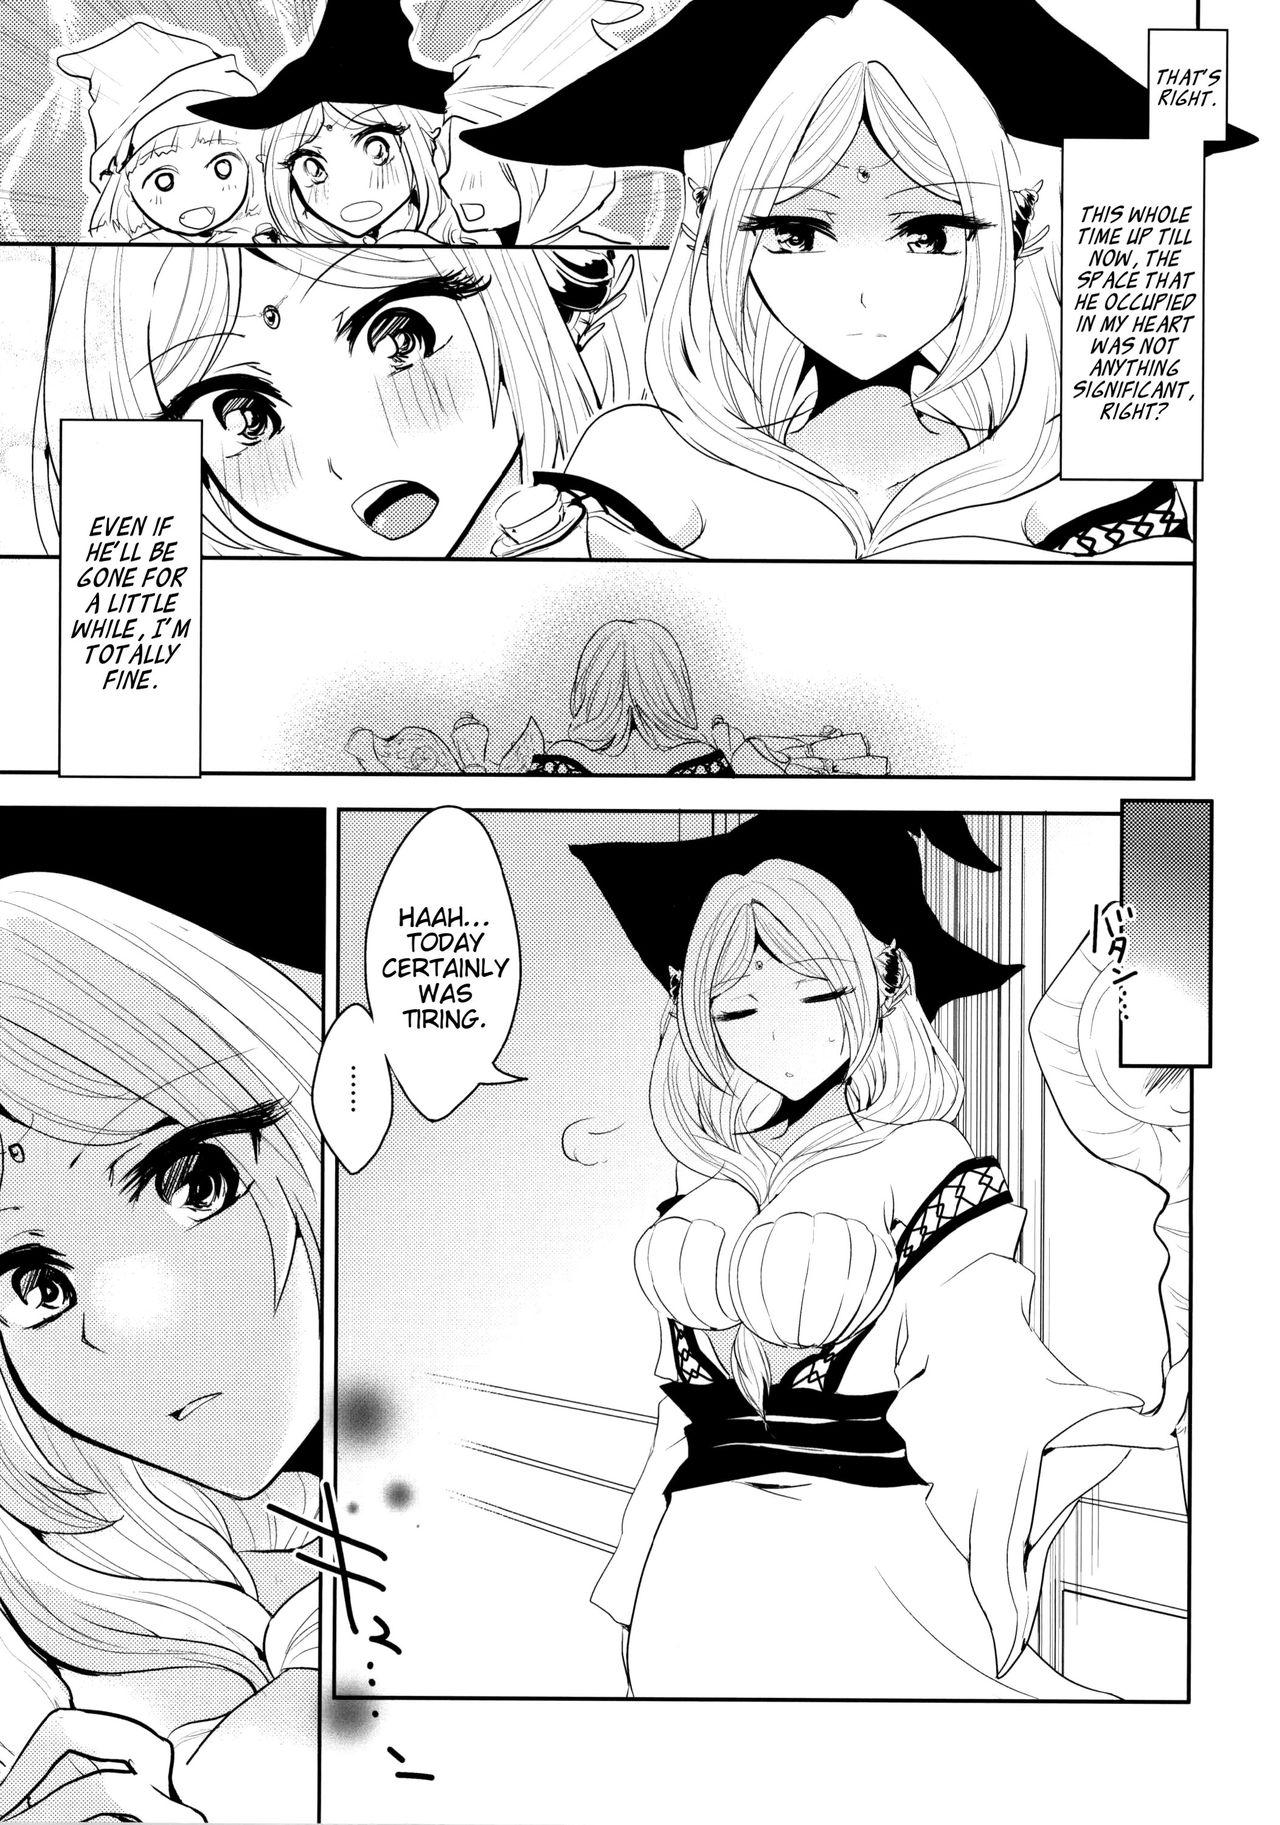 Hot Girl Fuck s.t.a. - Magi the labyrinth of magic Chat - Page 4